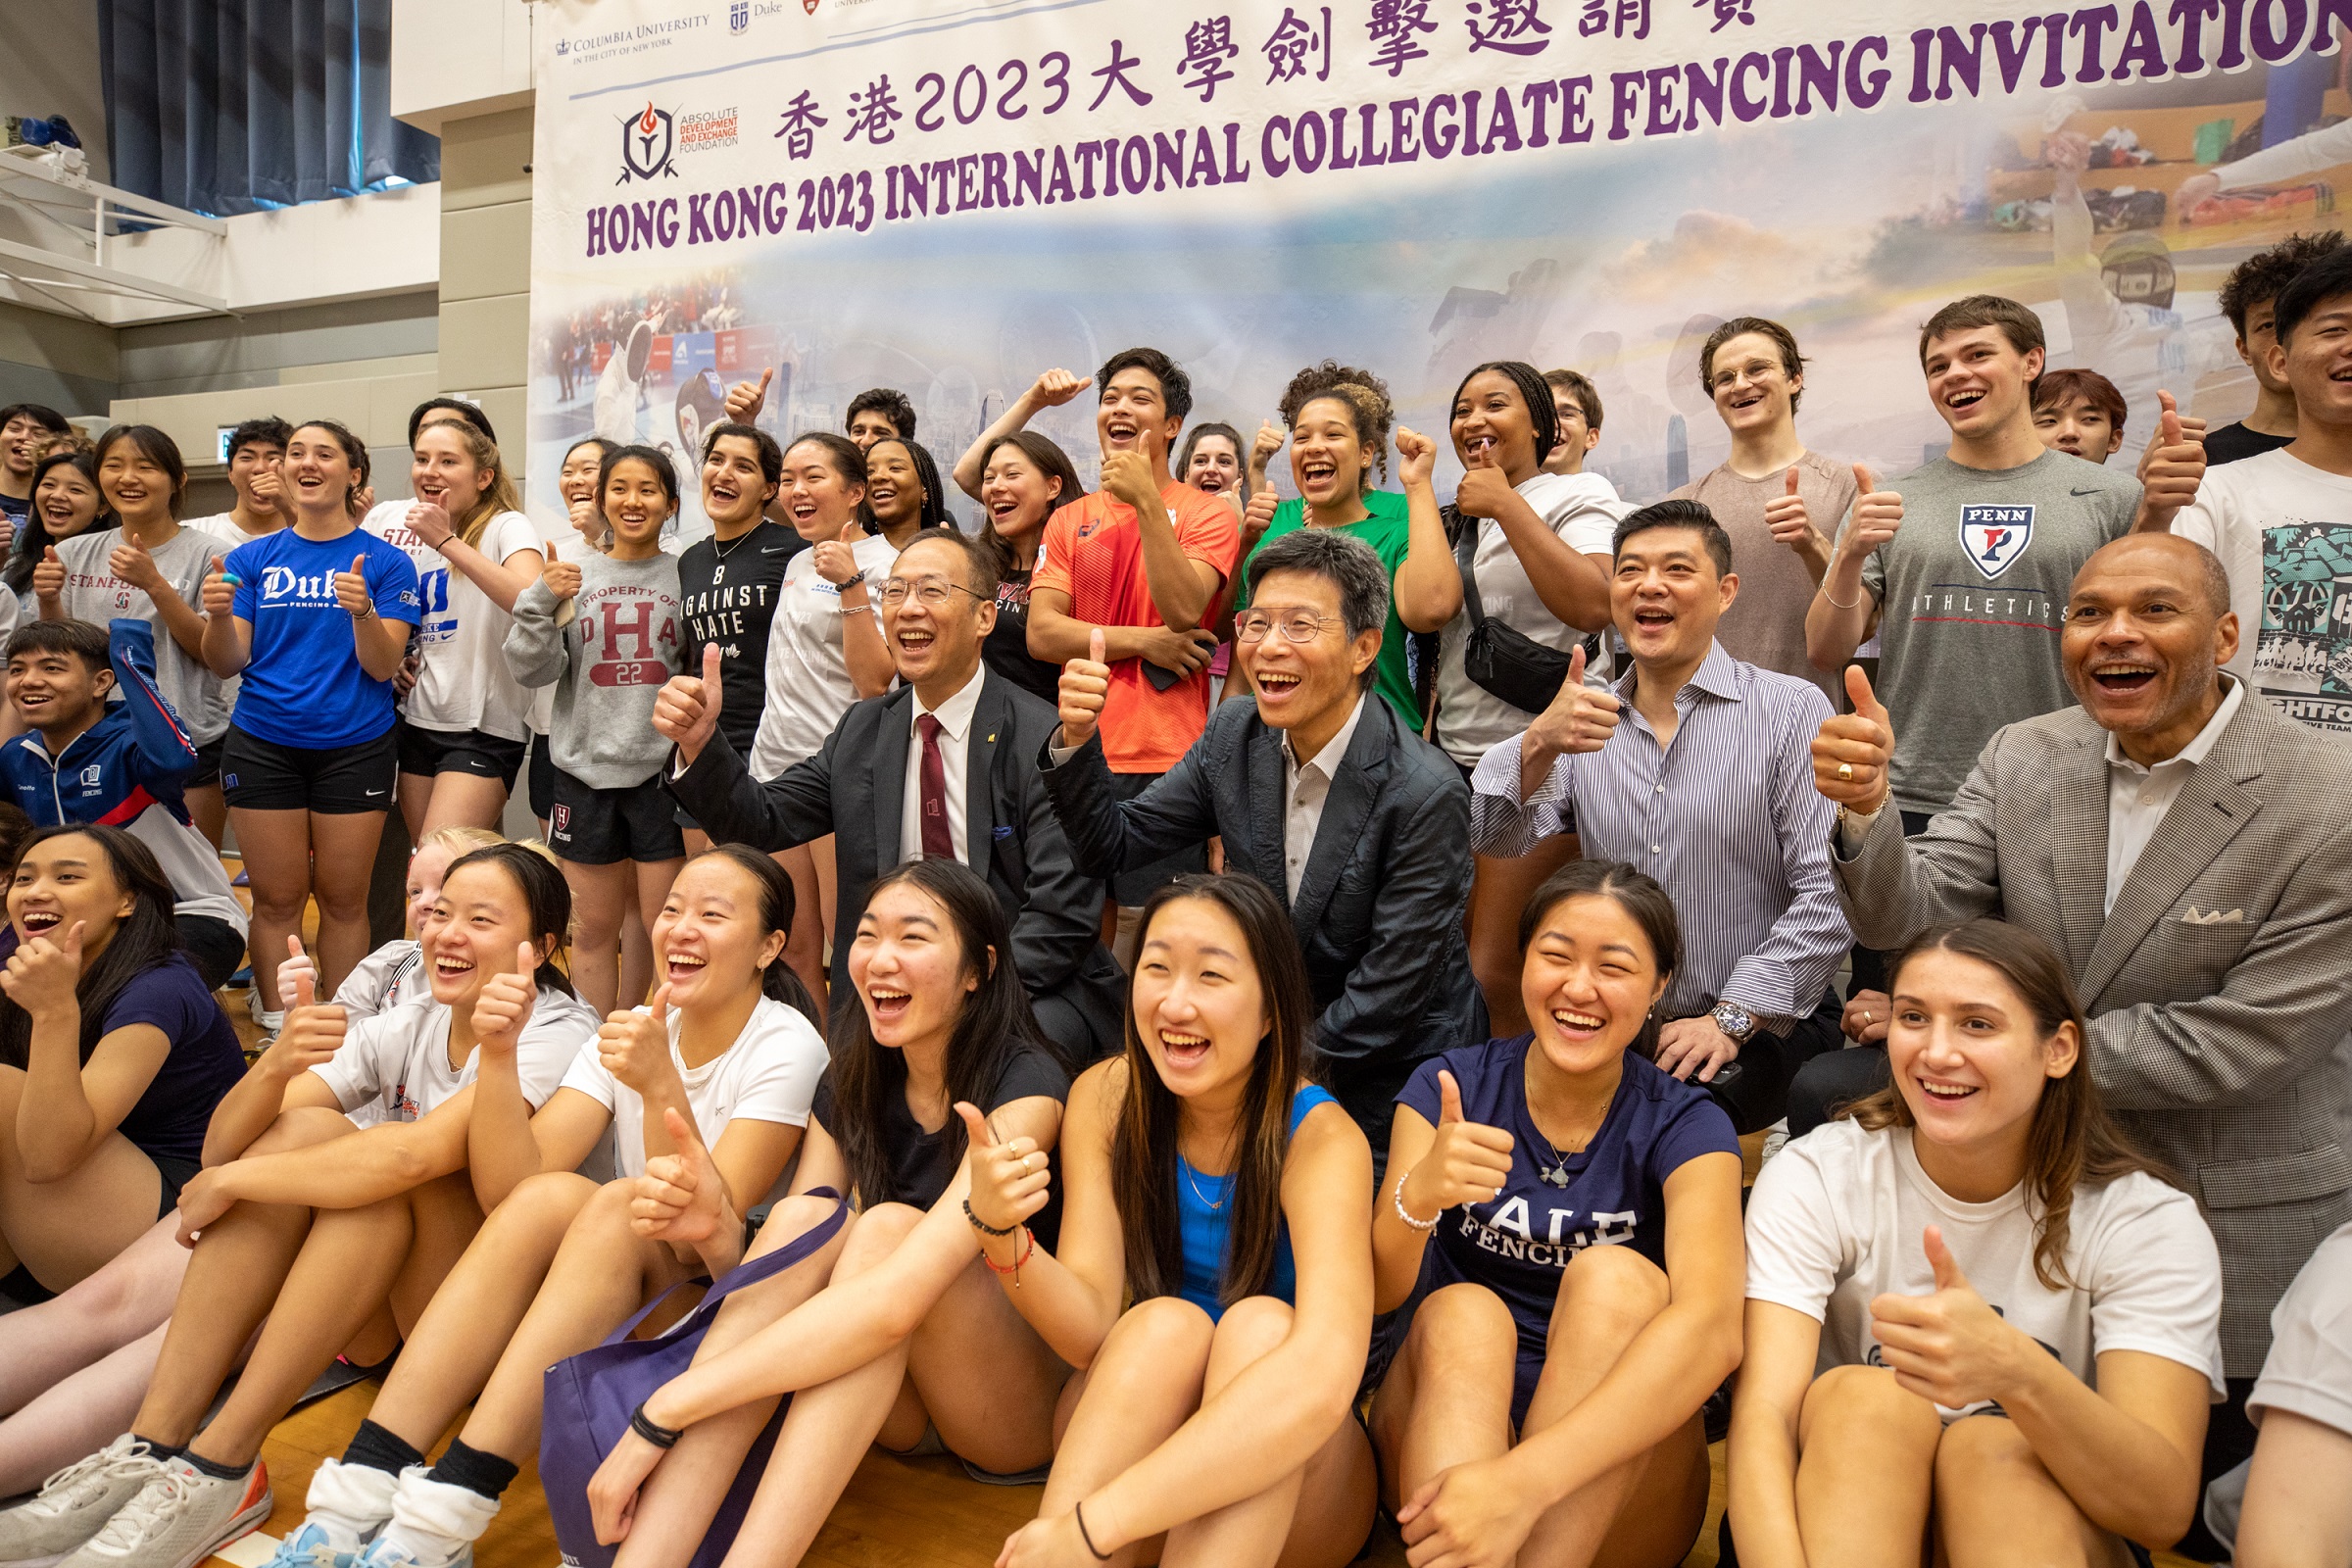 Professor Alexander Wai, President and Vice-Chancellor (fourth right, middle row) and Dr Albert Chau, Vice-President (Teaching and Learning) (third right, middle row) of HKBU take a group photo with the student fencers.